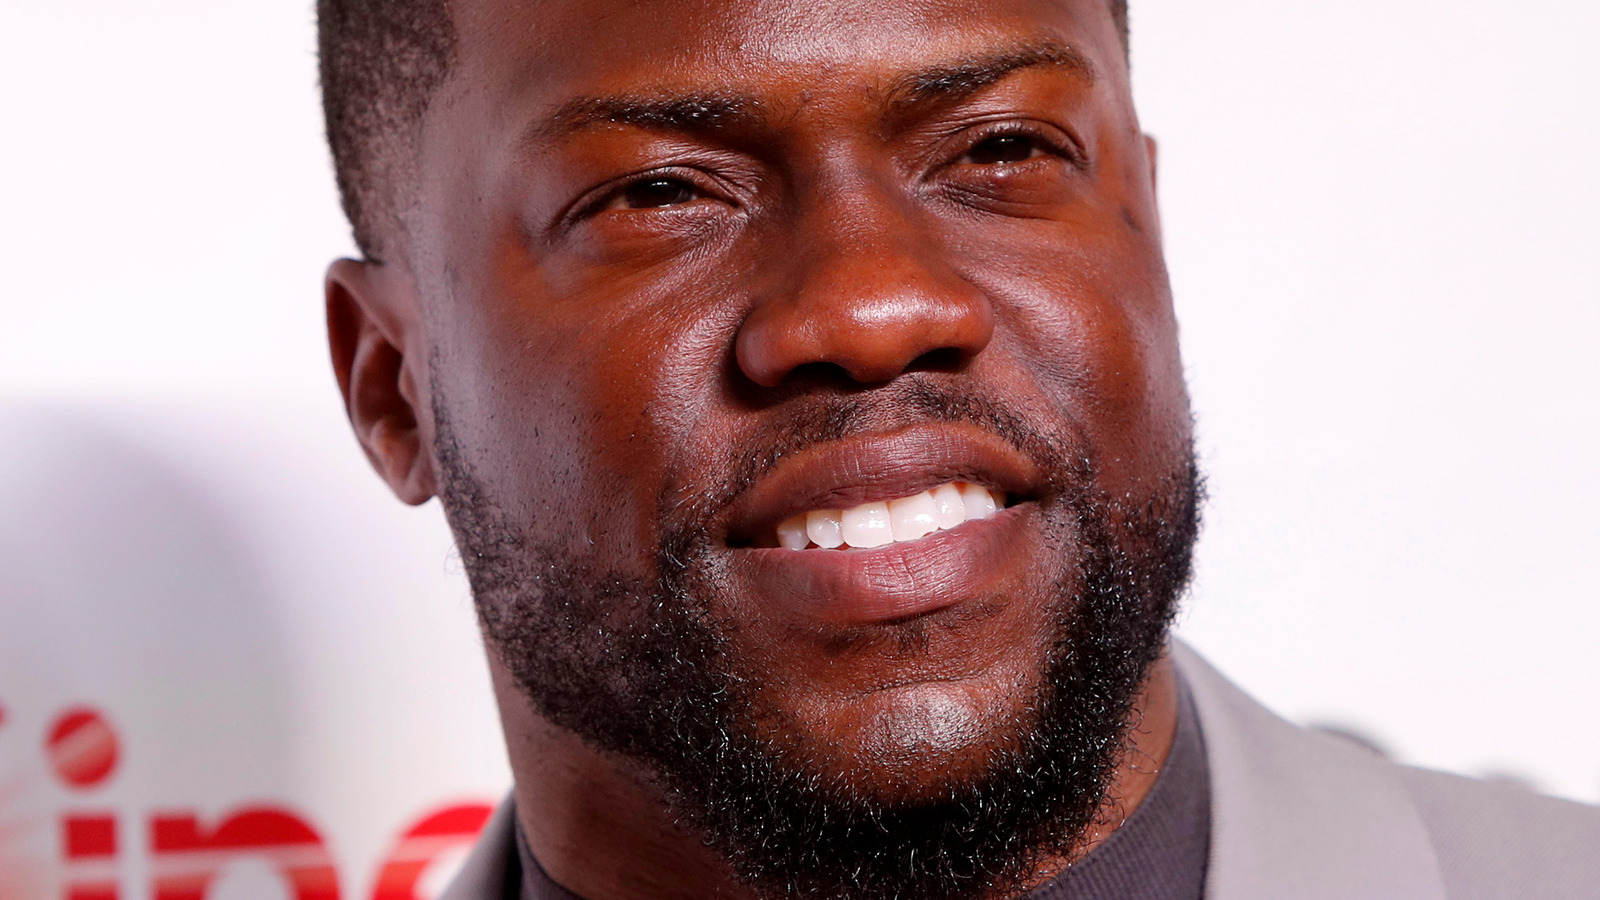 Kevin Hart's Super Bowl 2022 Commercial Will Leave You In Stitches